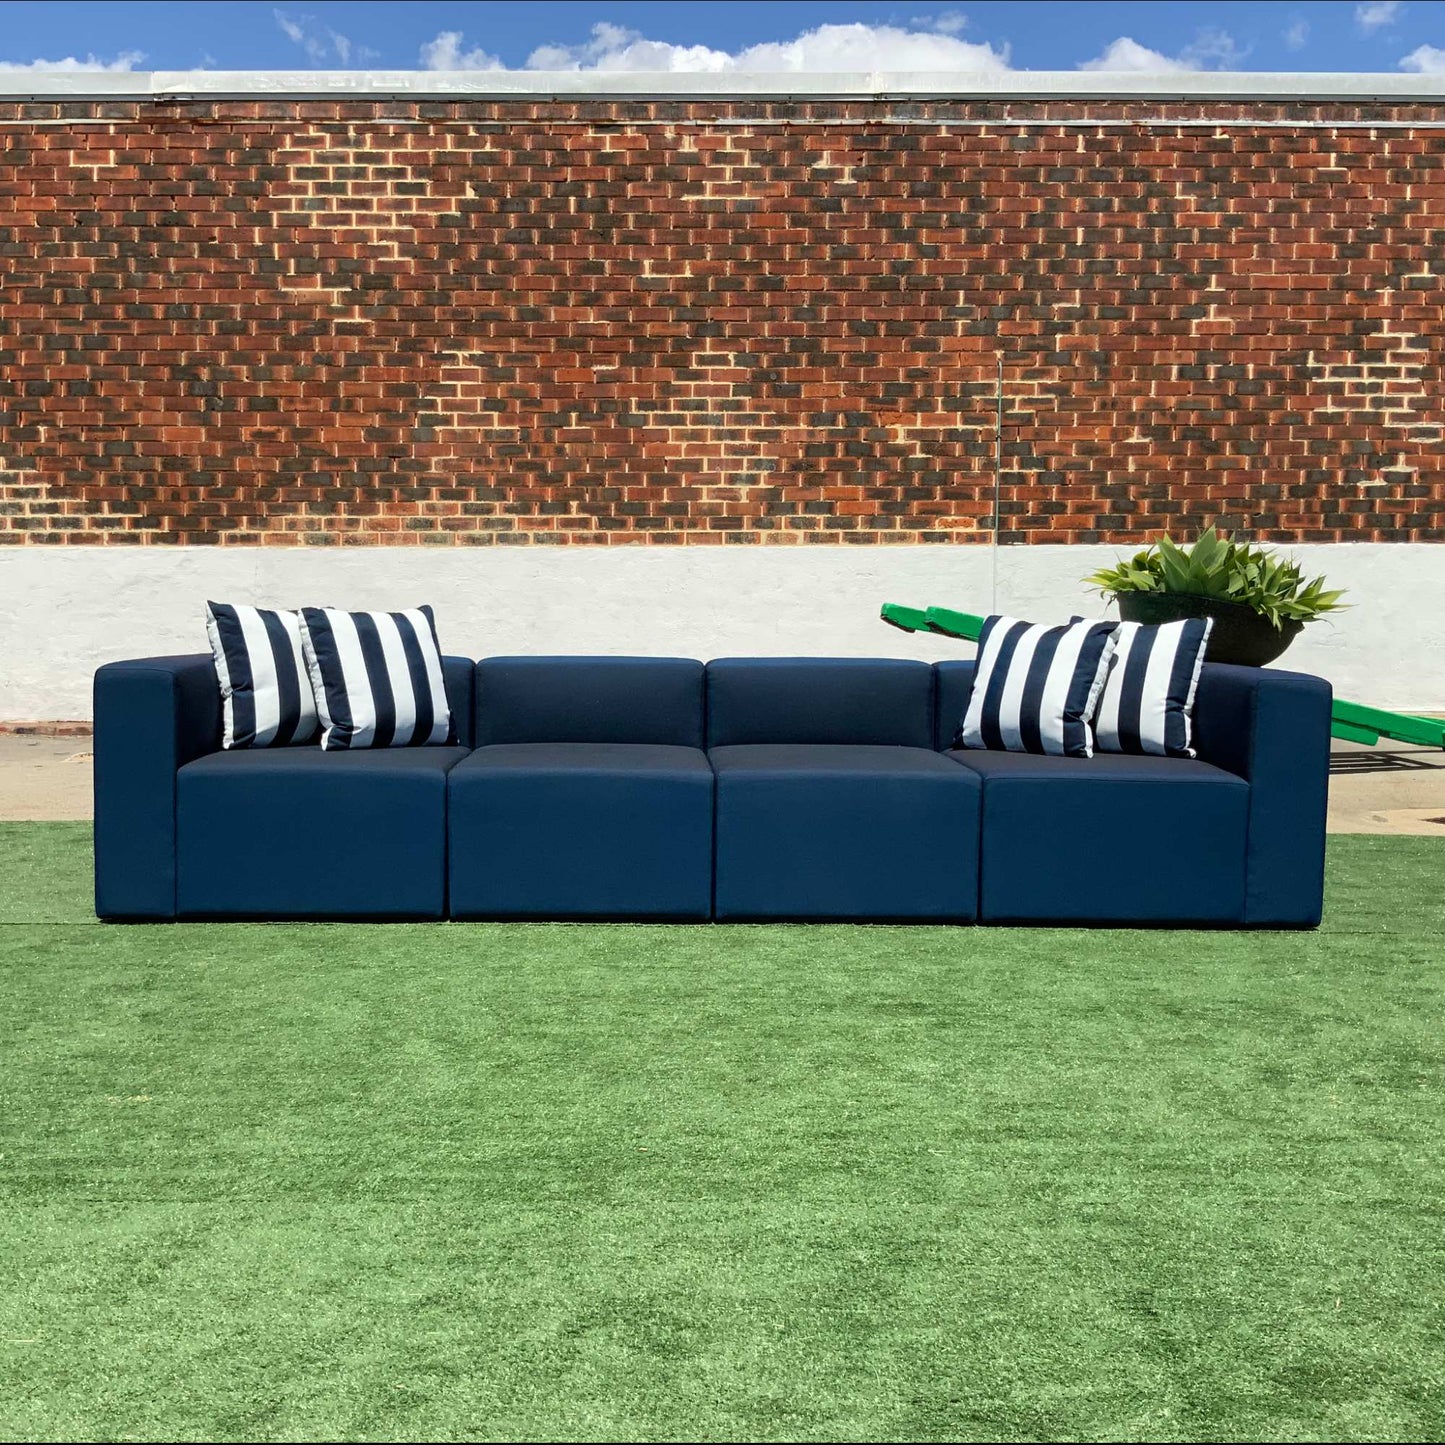 Batavia Outdoor Lounge | Uv Safe All Weather Fabric Multiple Sizes And Options Available Made To